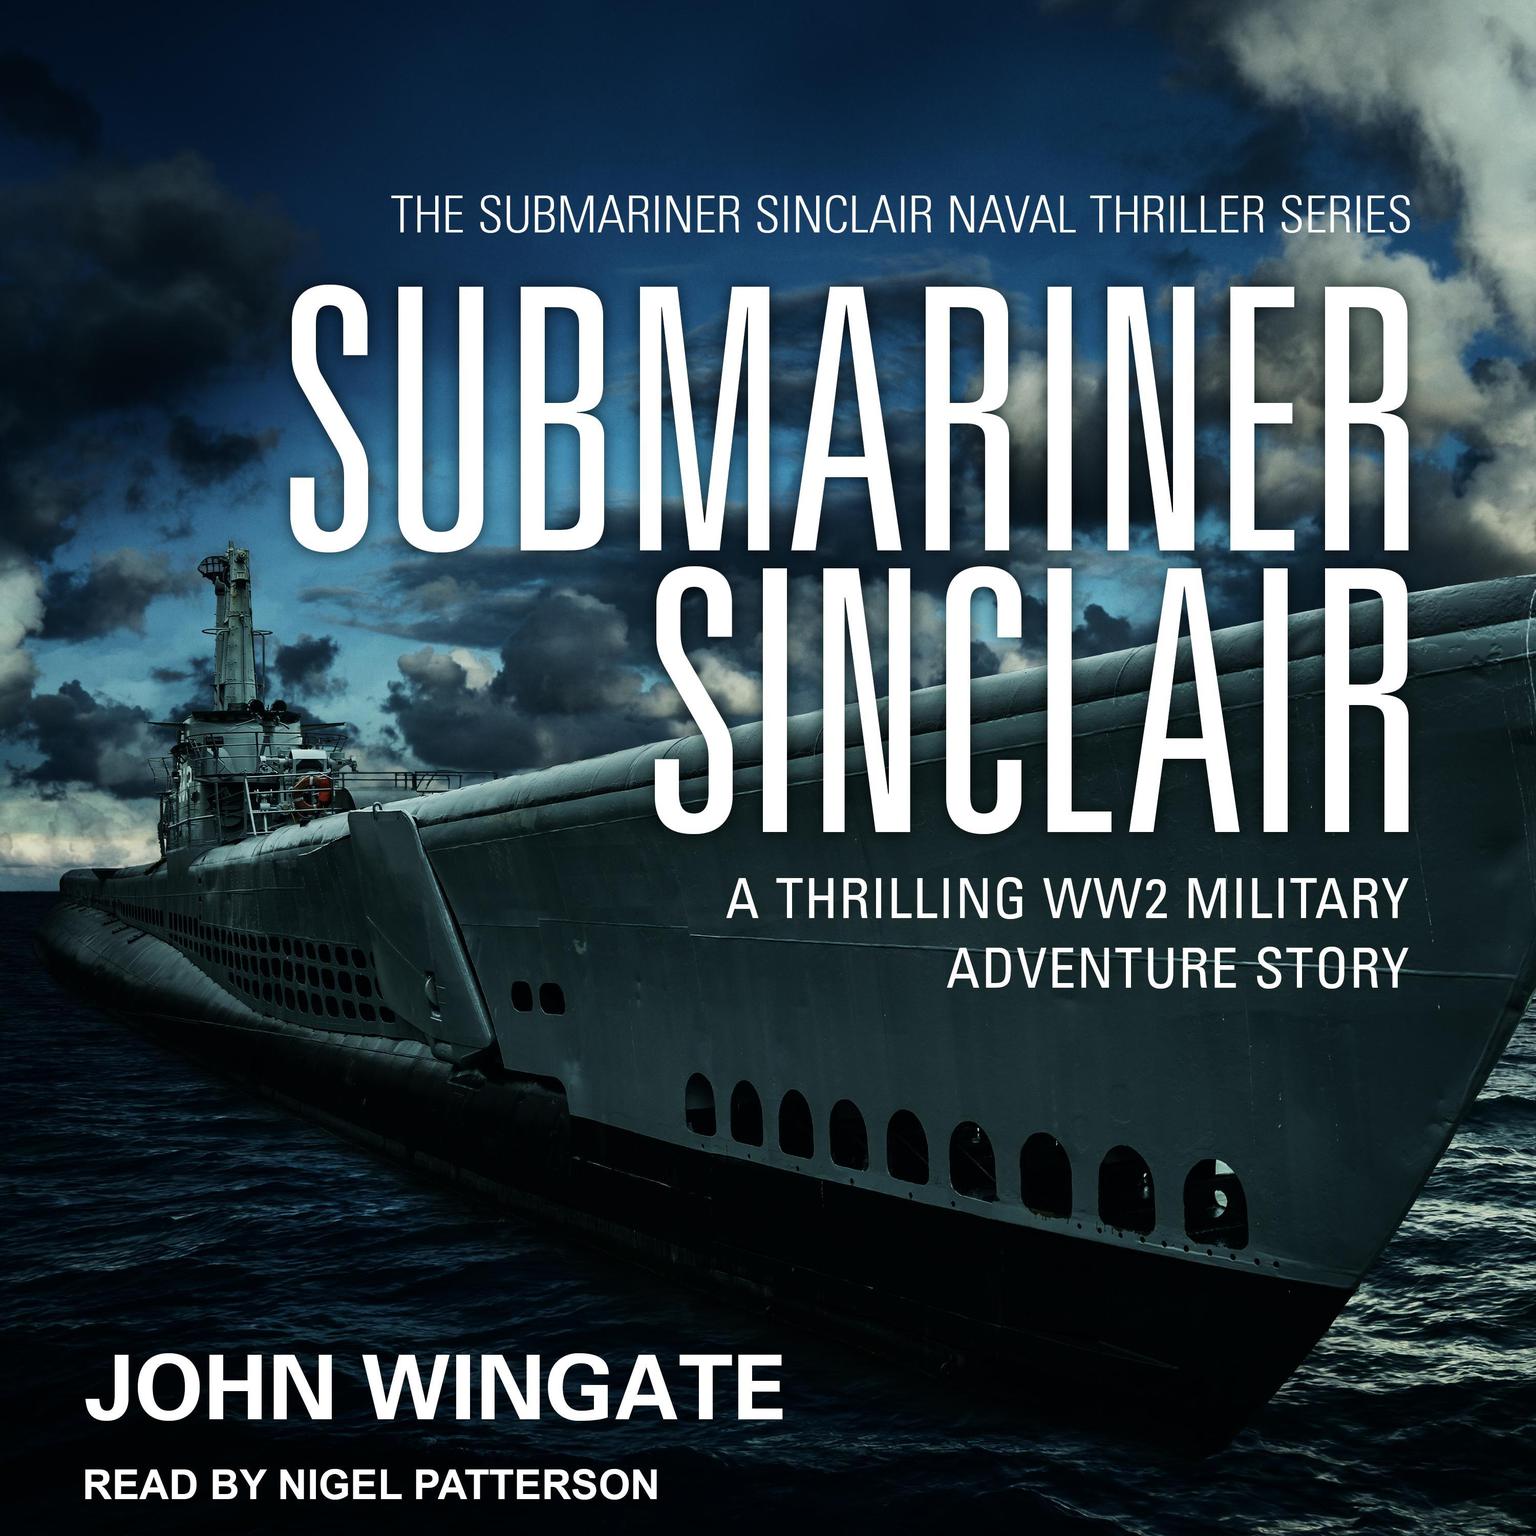 Submariner Sinclair: A thrilling WW2 military adventure story Audiobook, by John Wingate